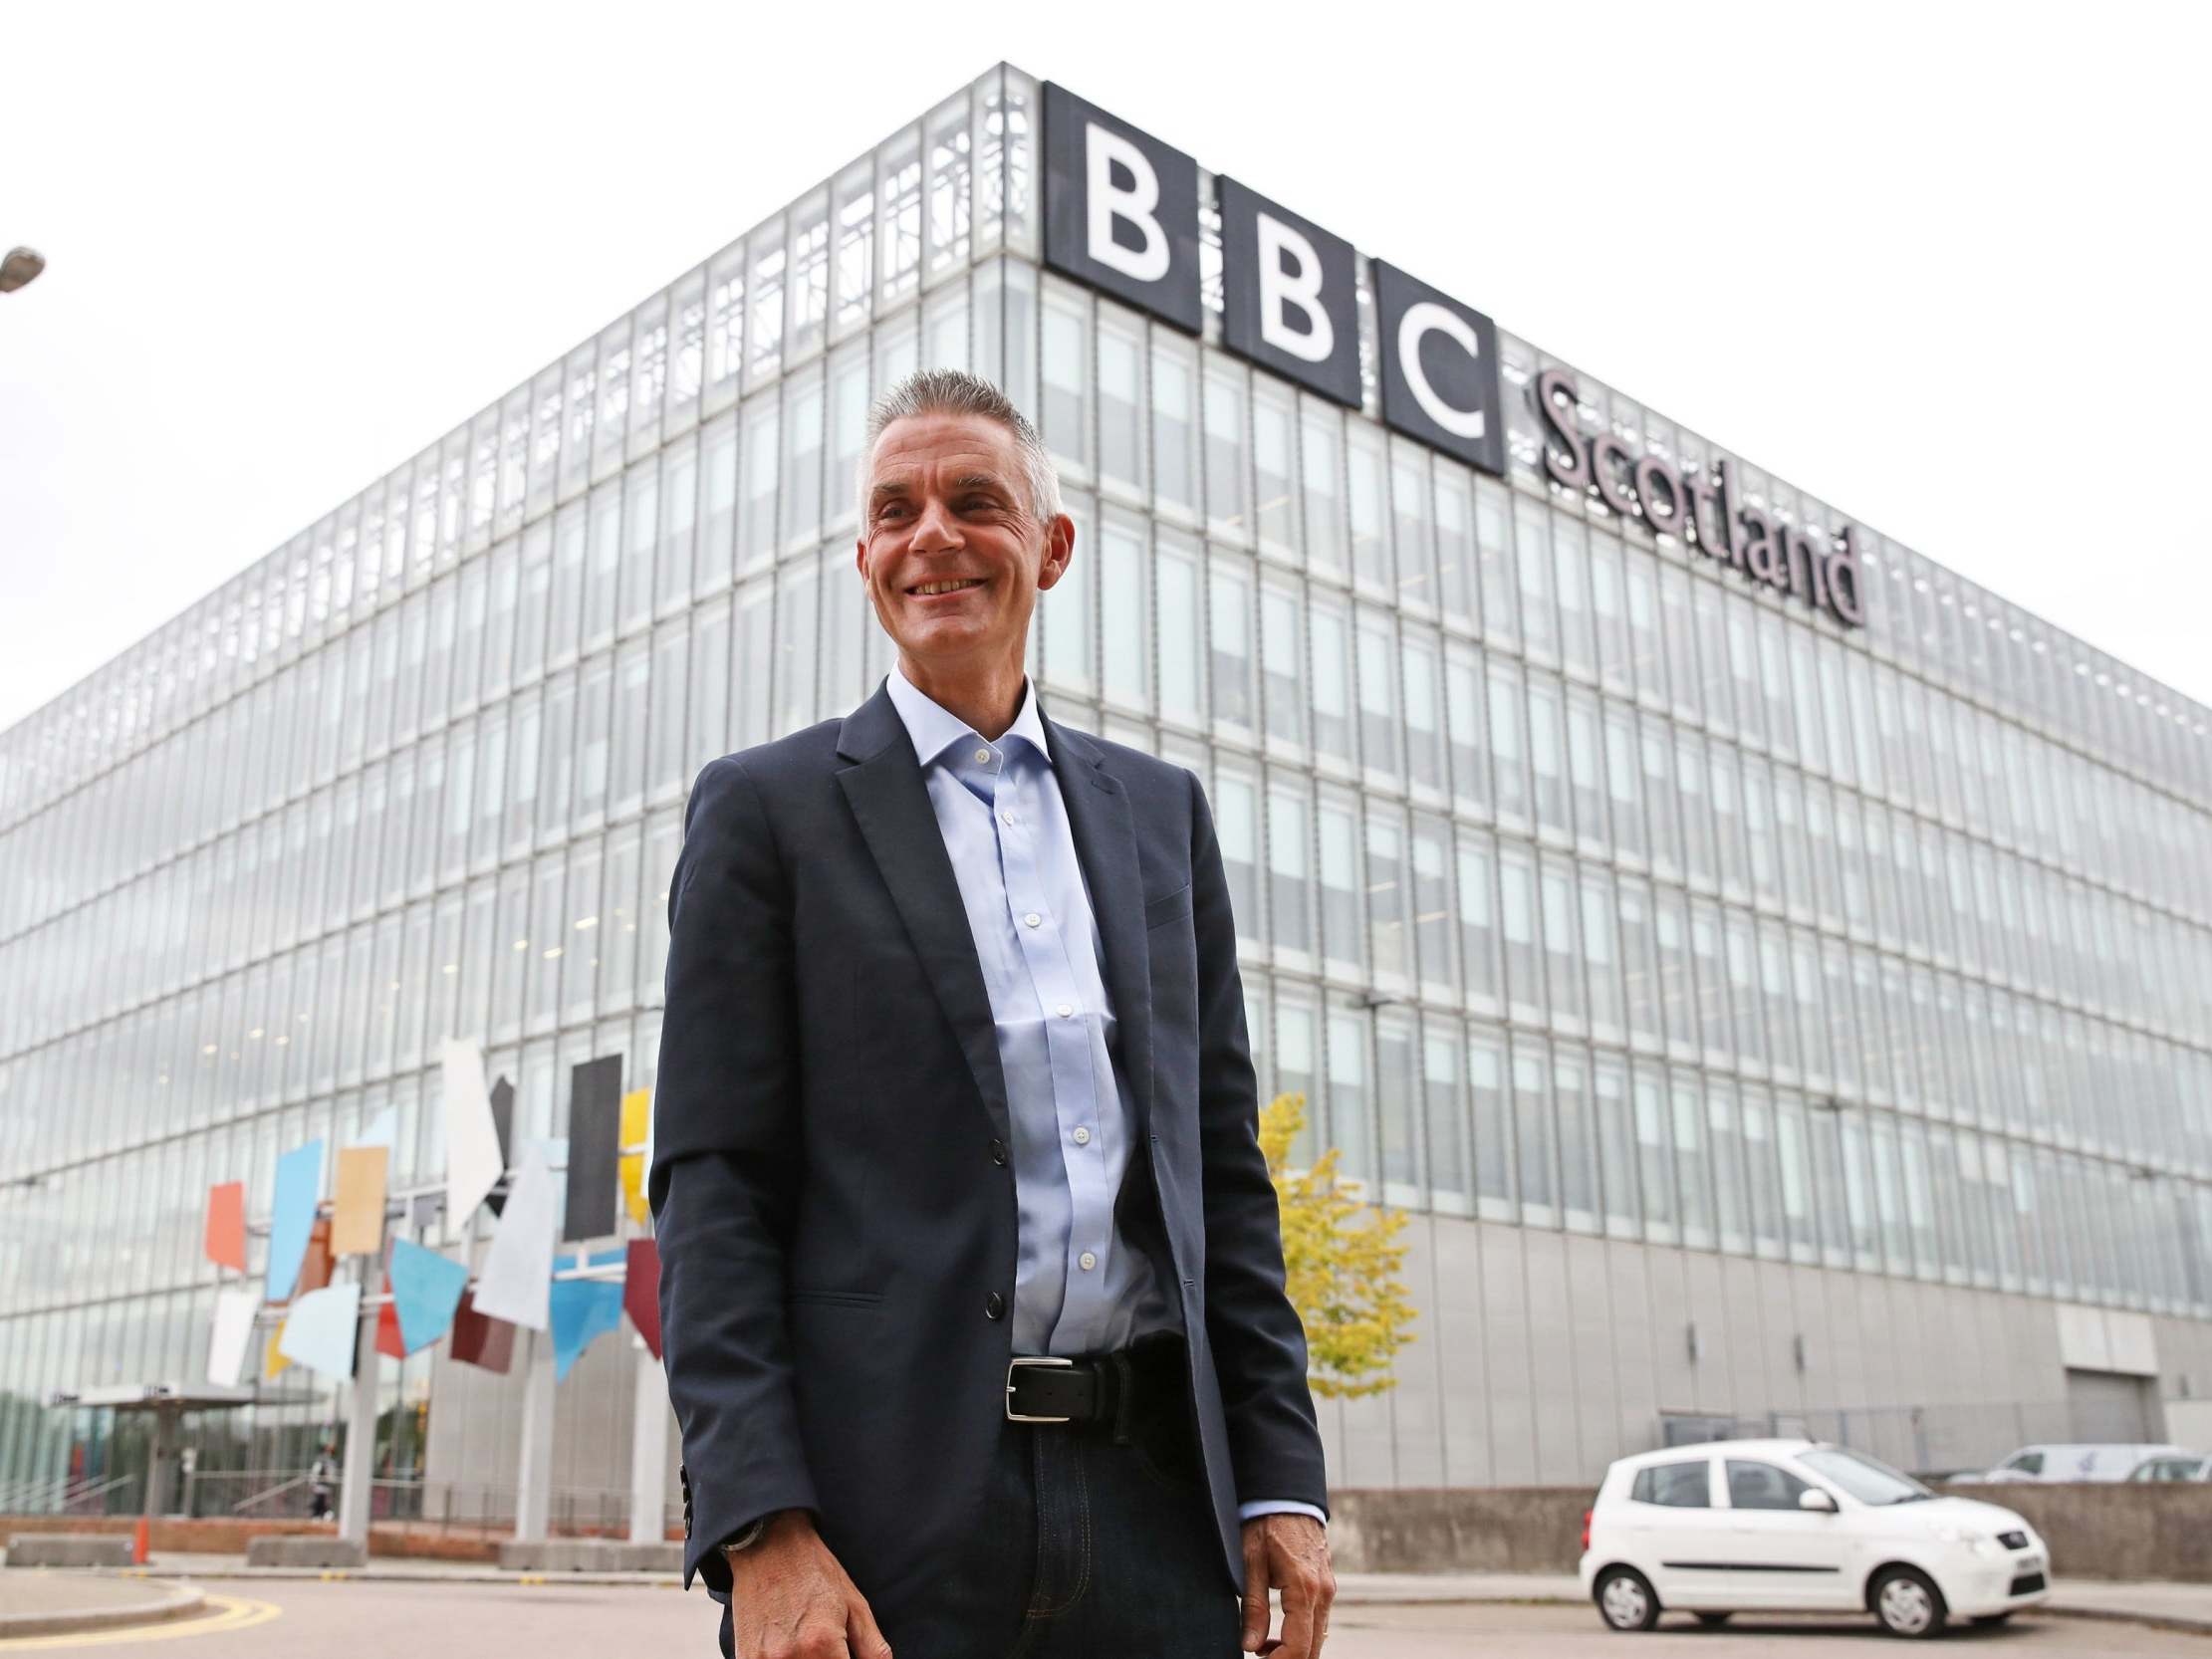 Tim Davie warned the BBC faced "significant risk" and had "no inalienable right to exist"